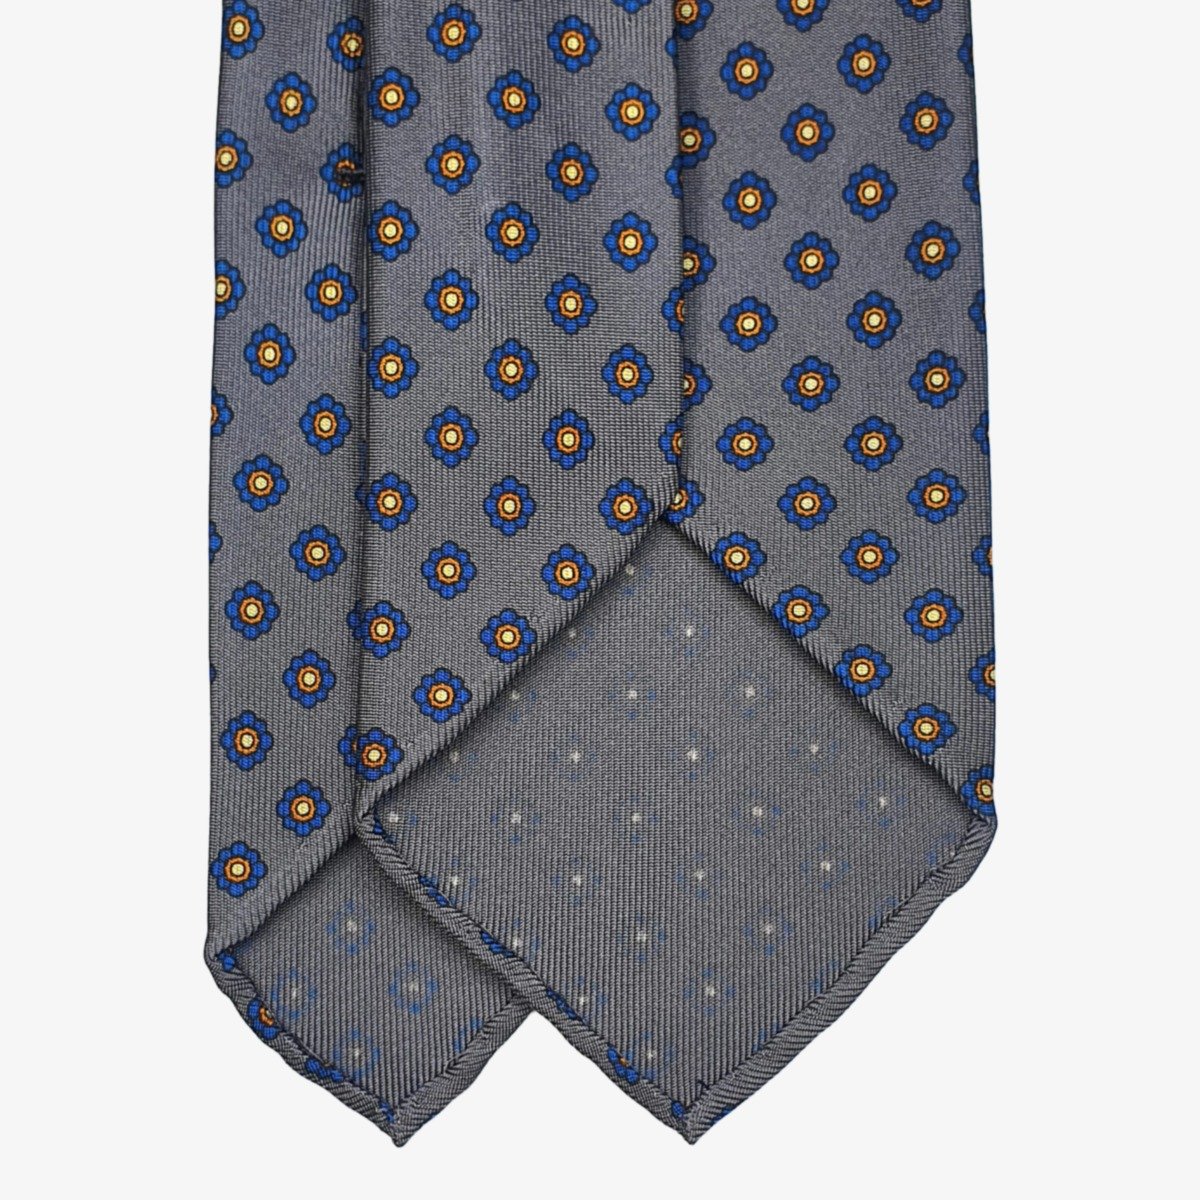 Shibumi Firenze grey silk tie with blue and yellow floral pattern